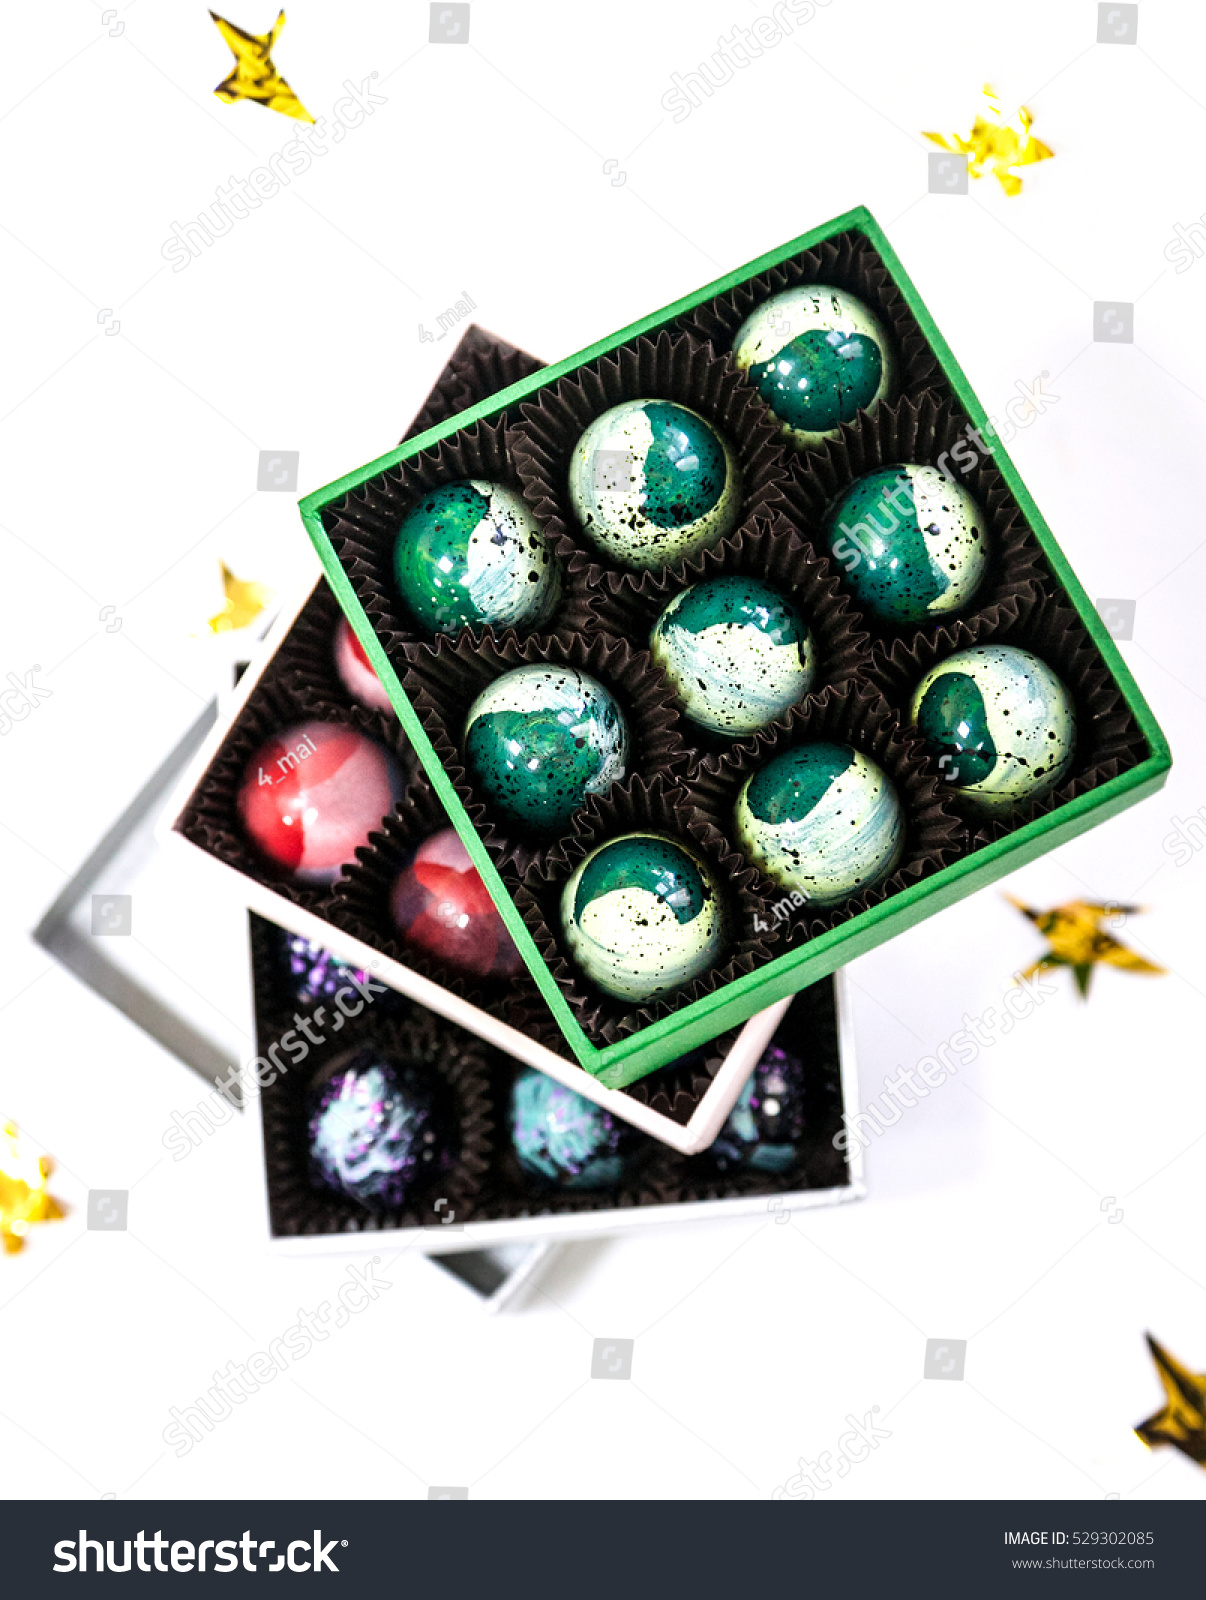 stock photo chocolate handpainted luxury candy bonbons in a gift box white background with golden stars 529302085